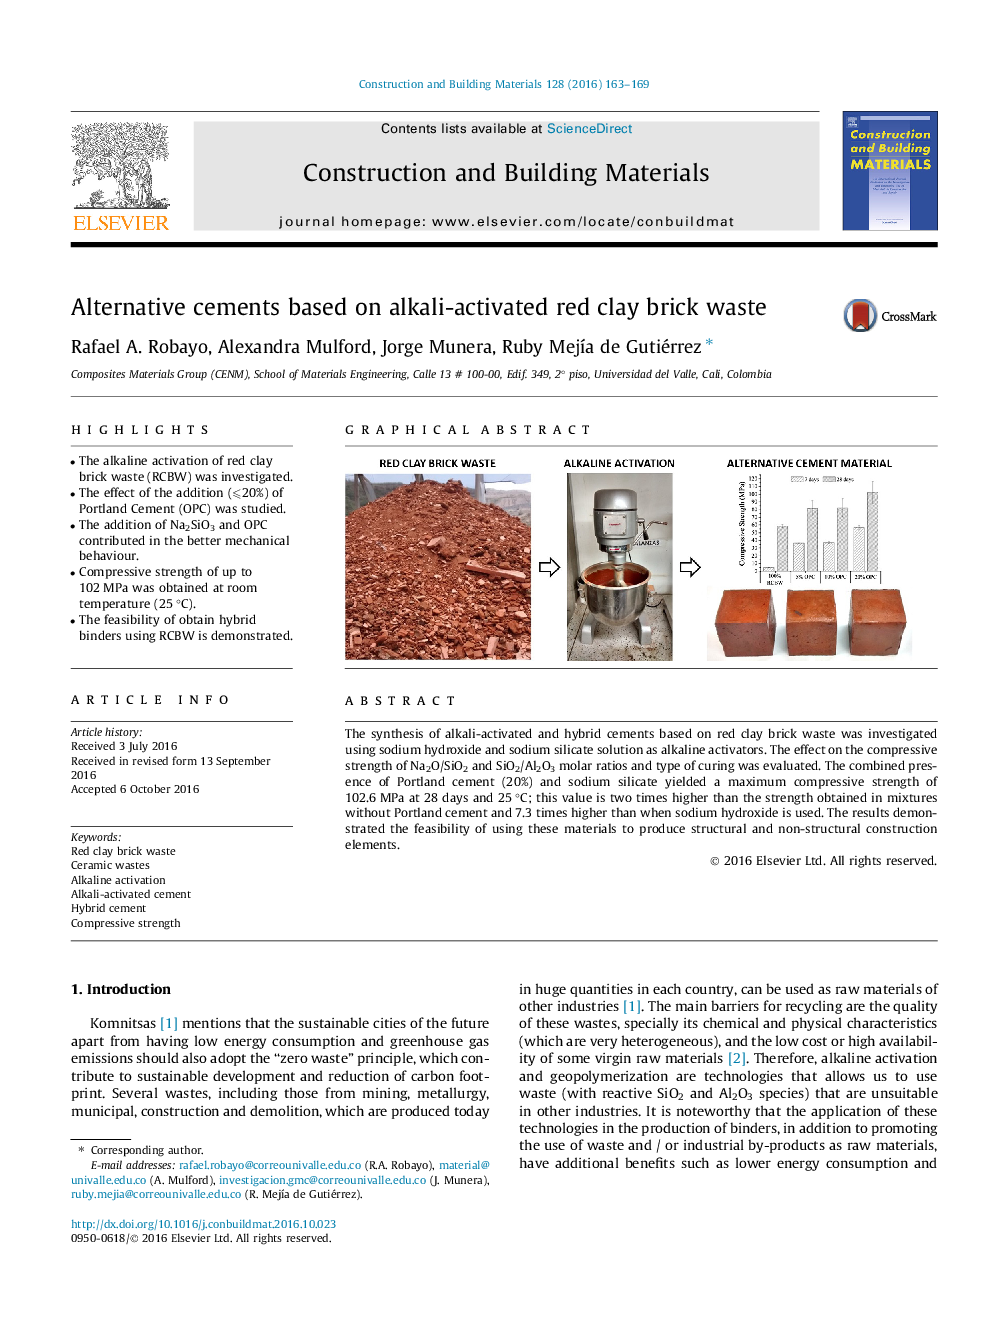 Alternative cements based on alkali-activated red clay brick waste